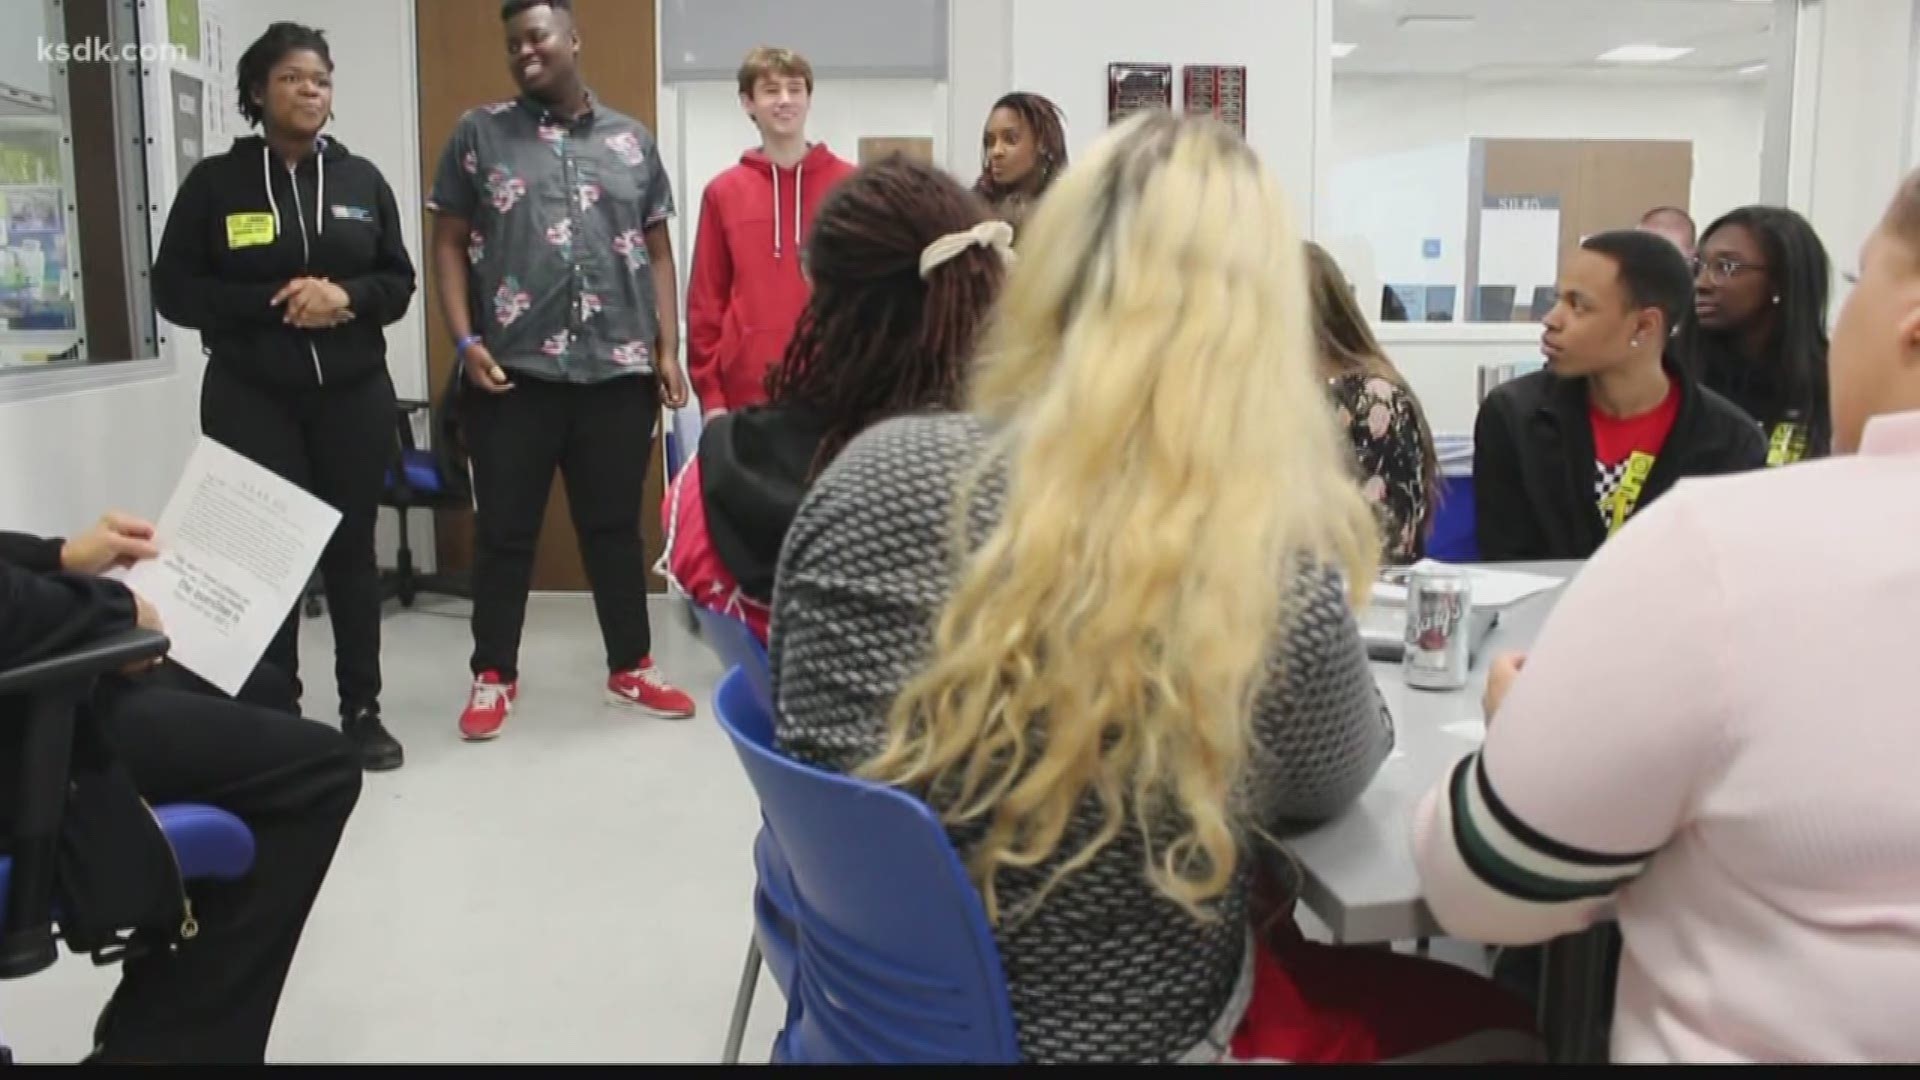 Students in St. Louis city, county collaborate on PSA